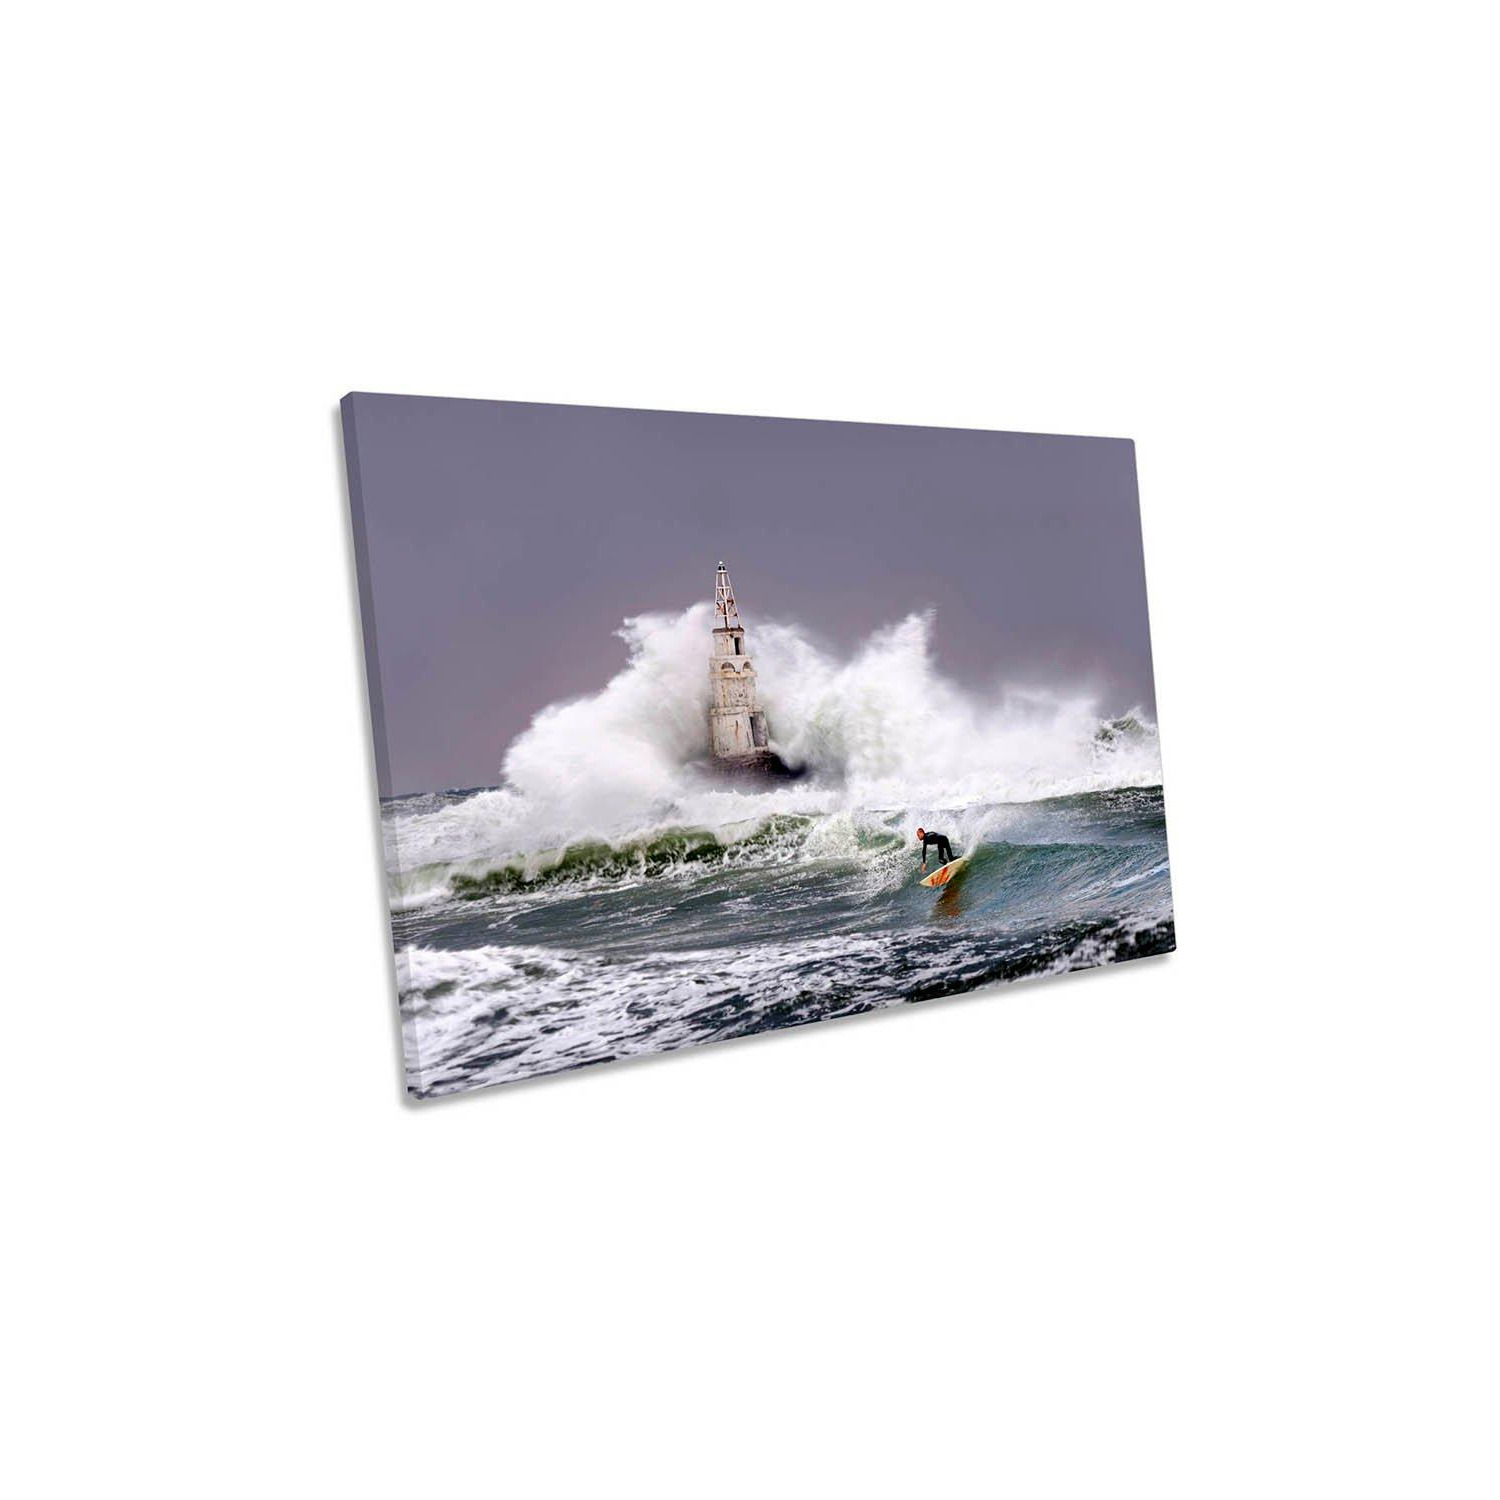 Surf Surfing Sport Waves Ocean Canvas Wall Art Picture Print - image 1